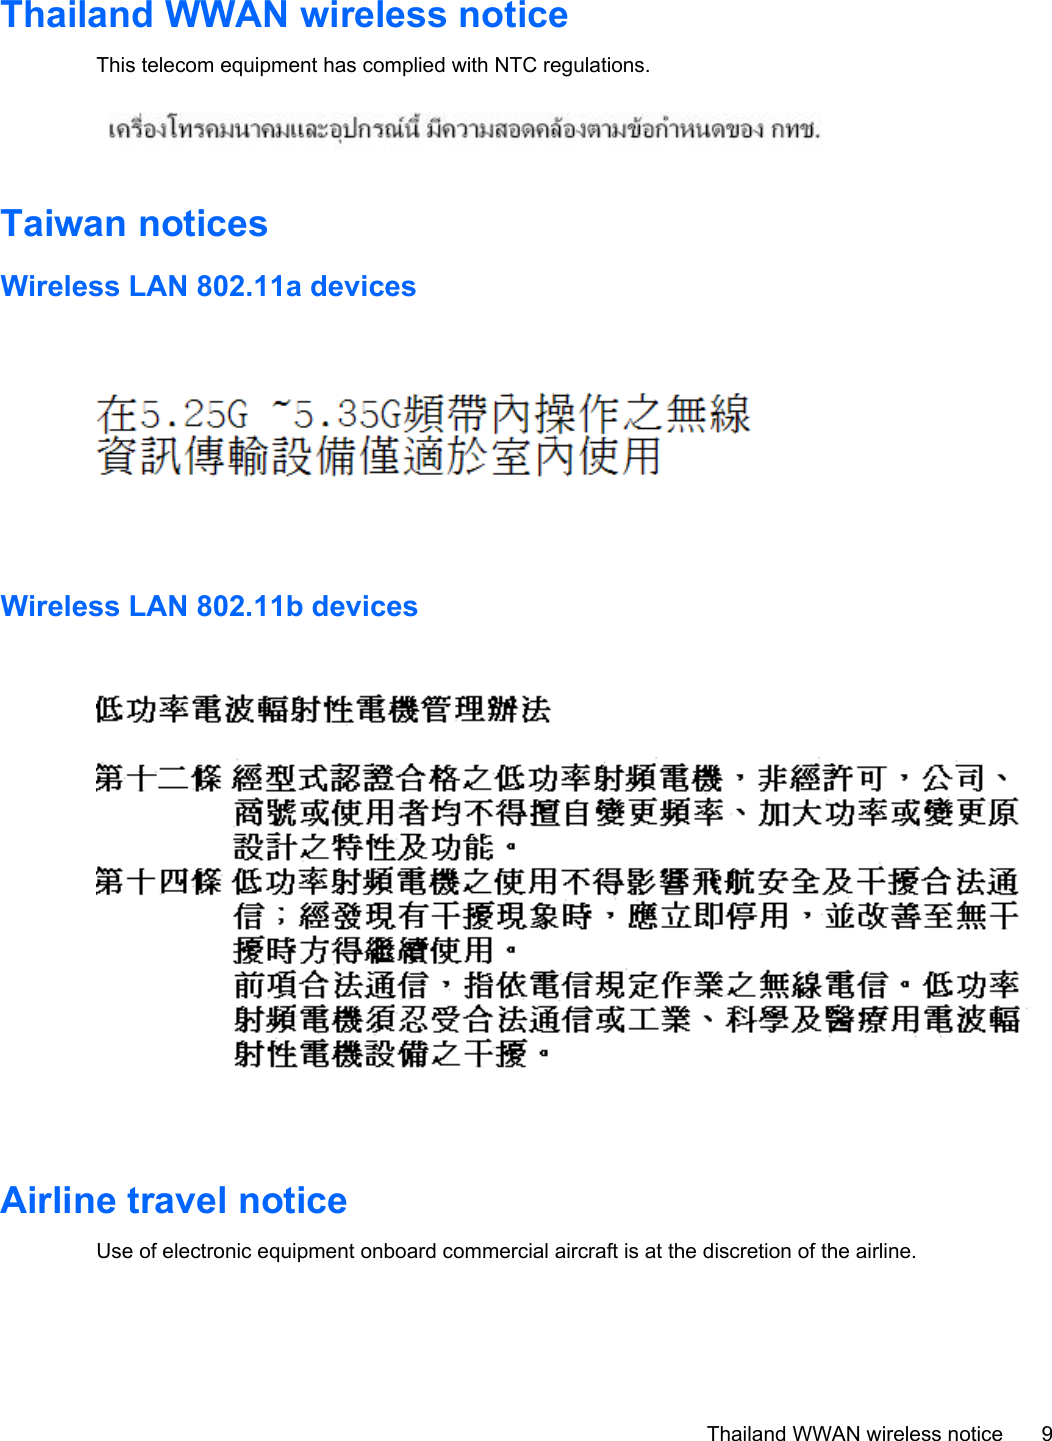 Thailand WWAN wireless noticeThis telecom equipment has complied with NTC regulations.Taiwan noticesWireless LAN 802.11a devicesWireless LAN 802.11b devicesAirline travel noticeUse of electronic equipment onboard commercial aircraft is at the discretion of the airline.Thailand WWAN wireless notice 9